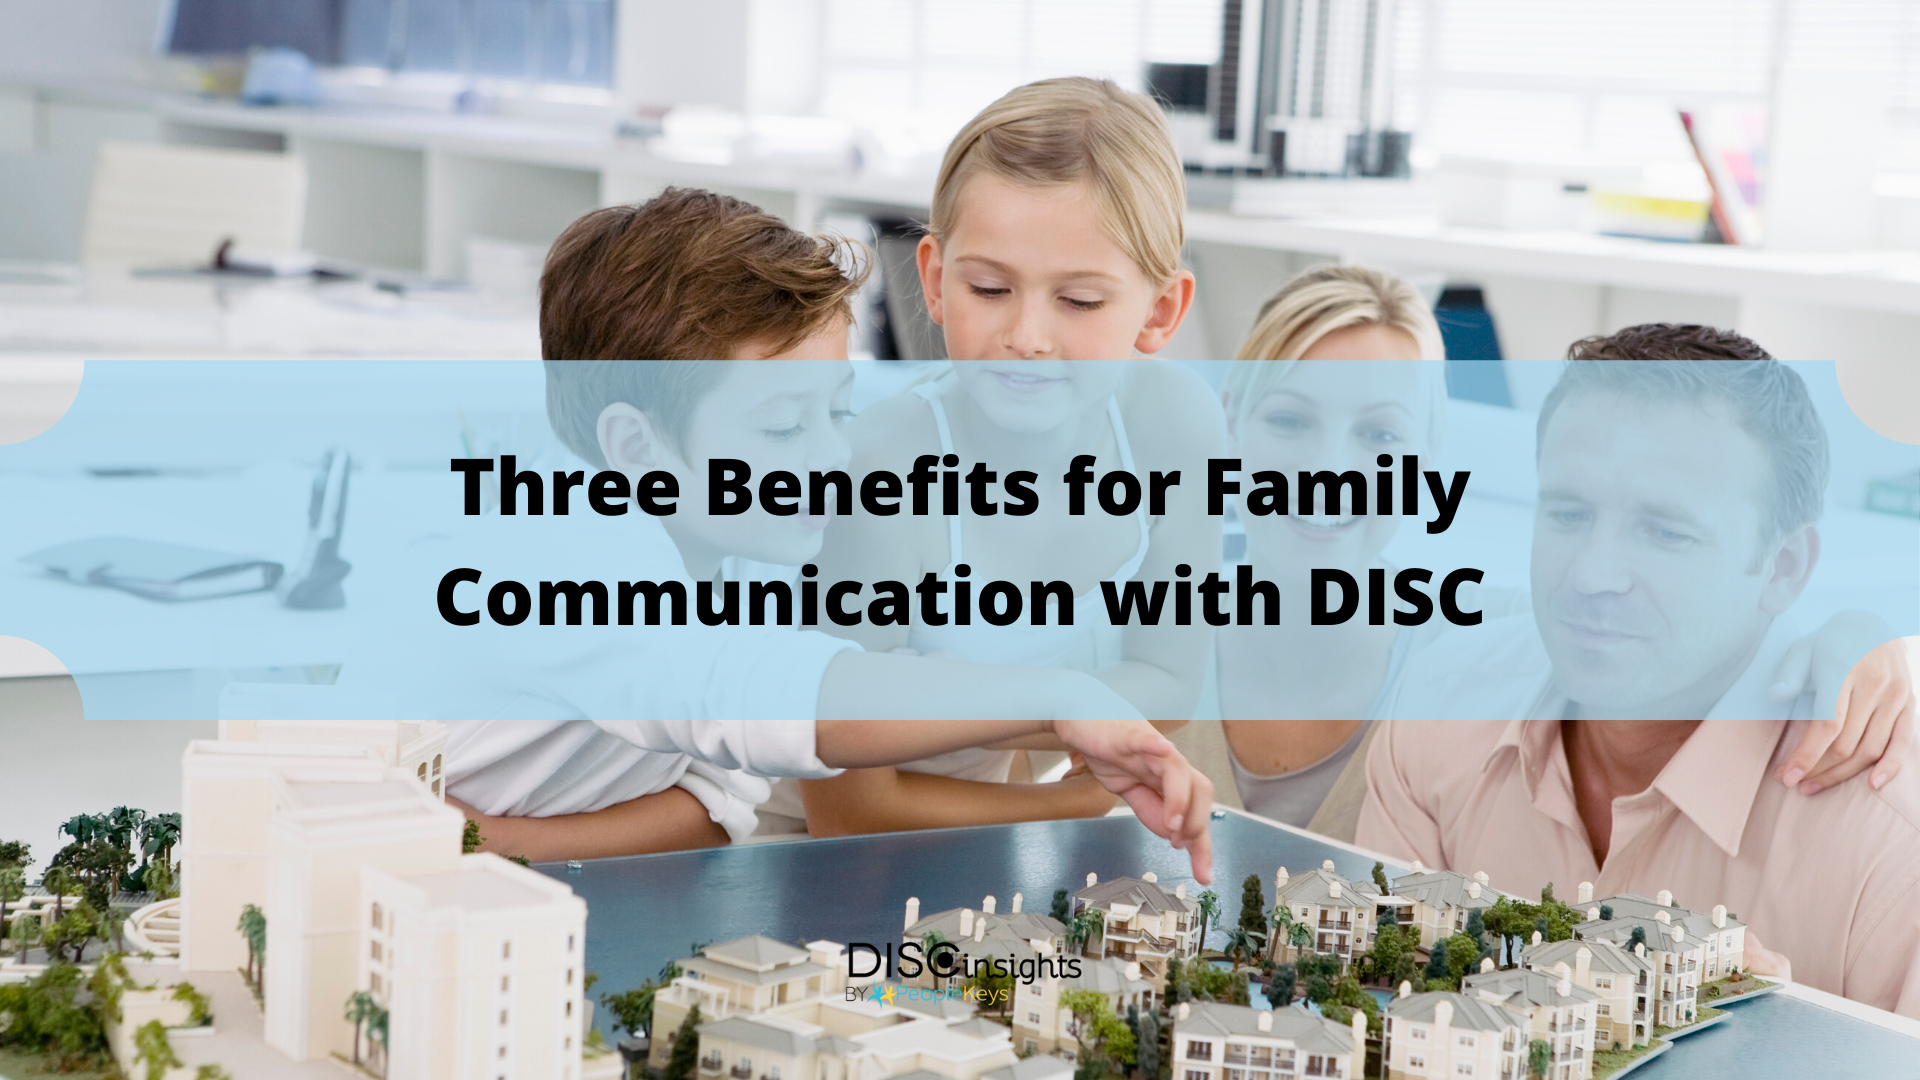 Family Communication with DISC